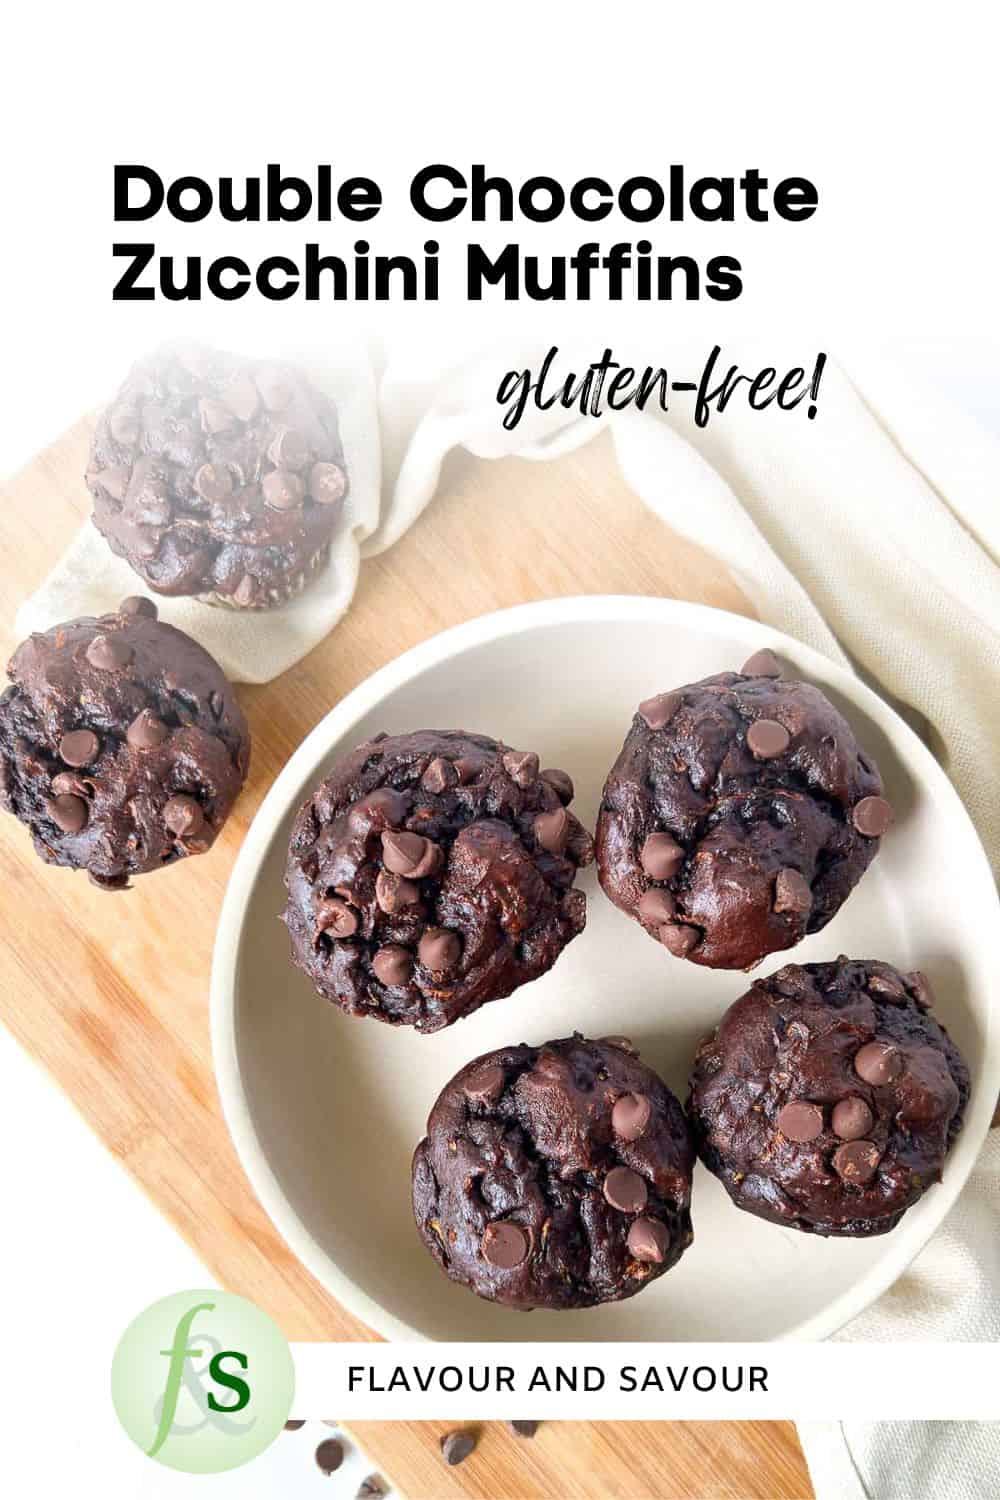 Image with text overlay for Gluten-free Double Chocolate Zucchini Muffins.